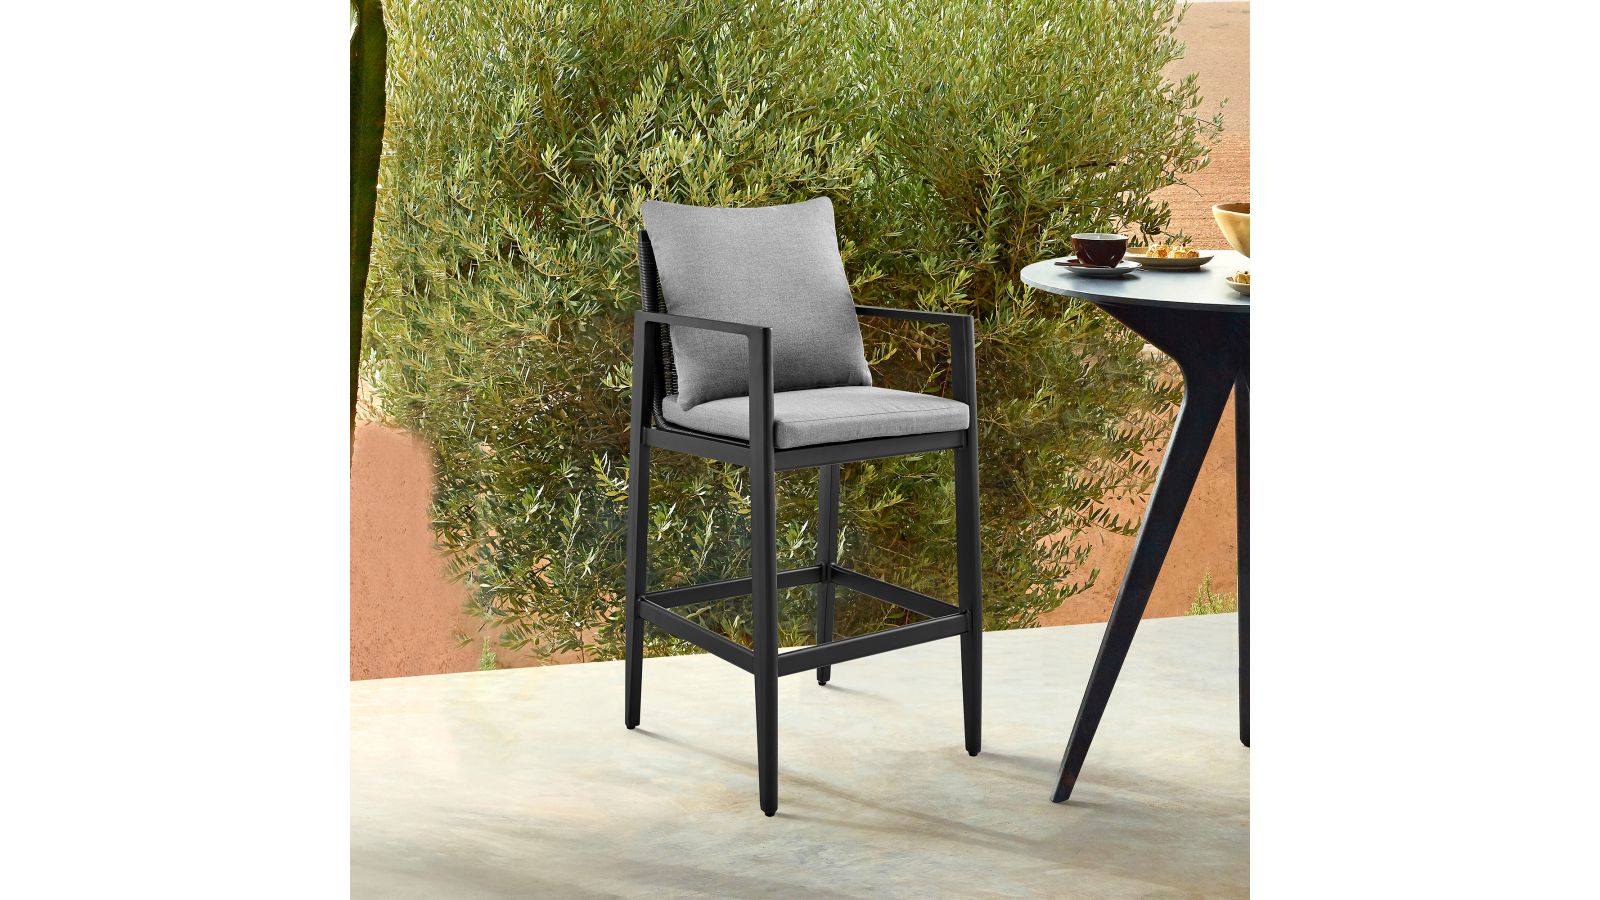 Cayman Outdoor Patio Counter Height Bar Stool in Aluminum with Grey Cushions